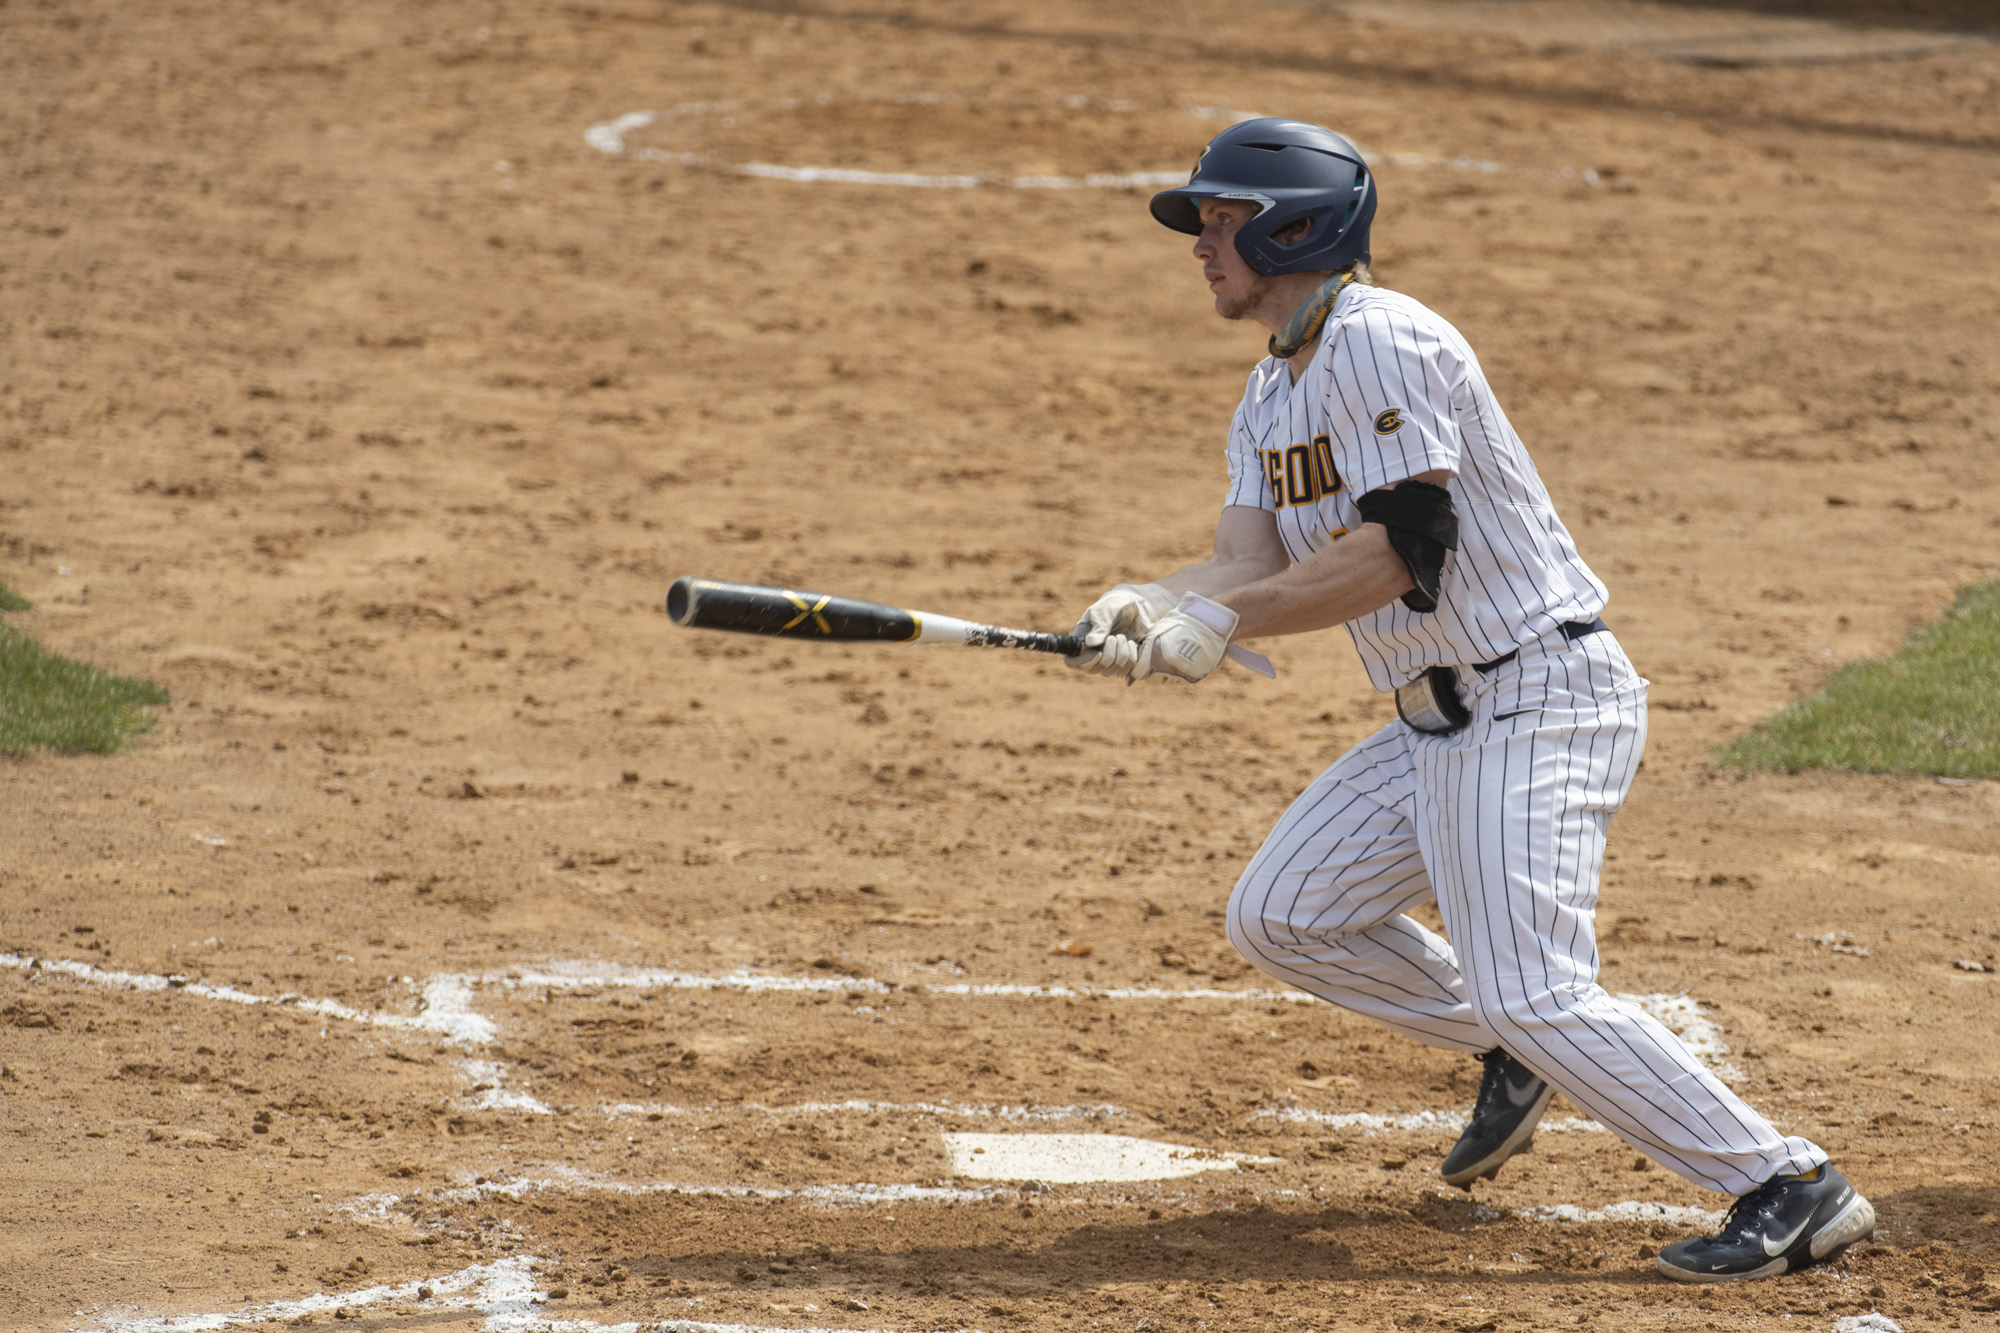 Blugolds Can't Complete Comeback In Extras